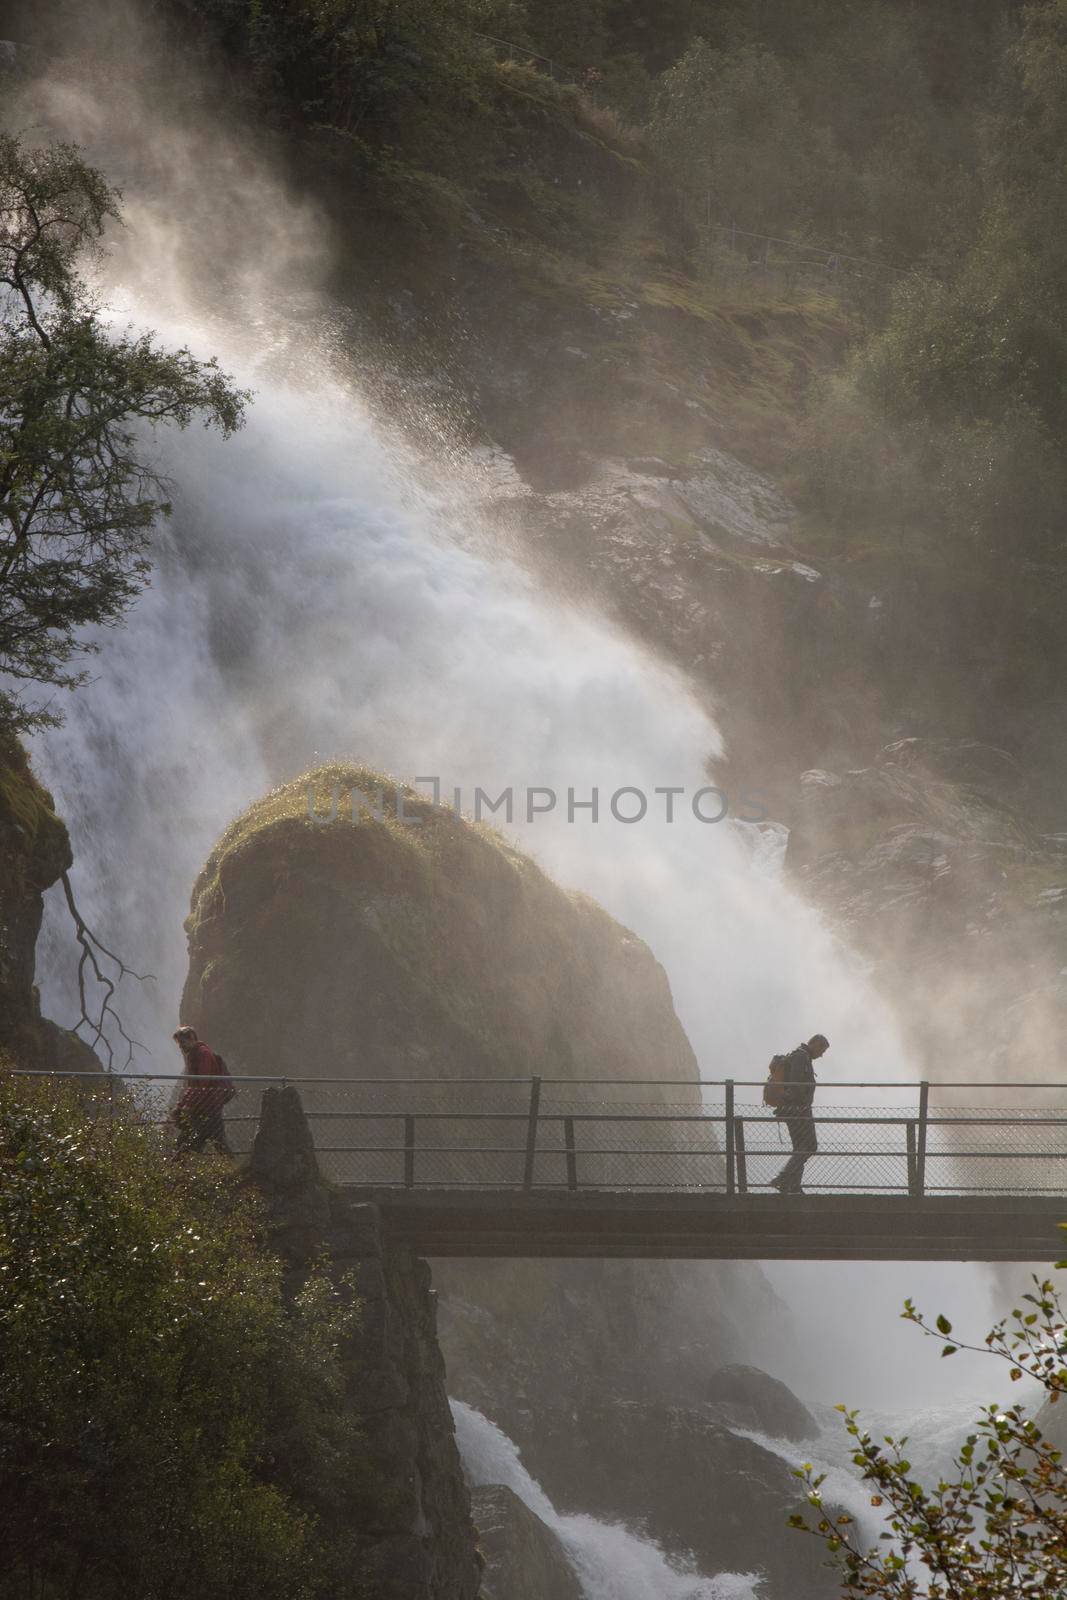 Misty landscape showing men walking on a bridge and a big waterfall falling over a rock behind them